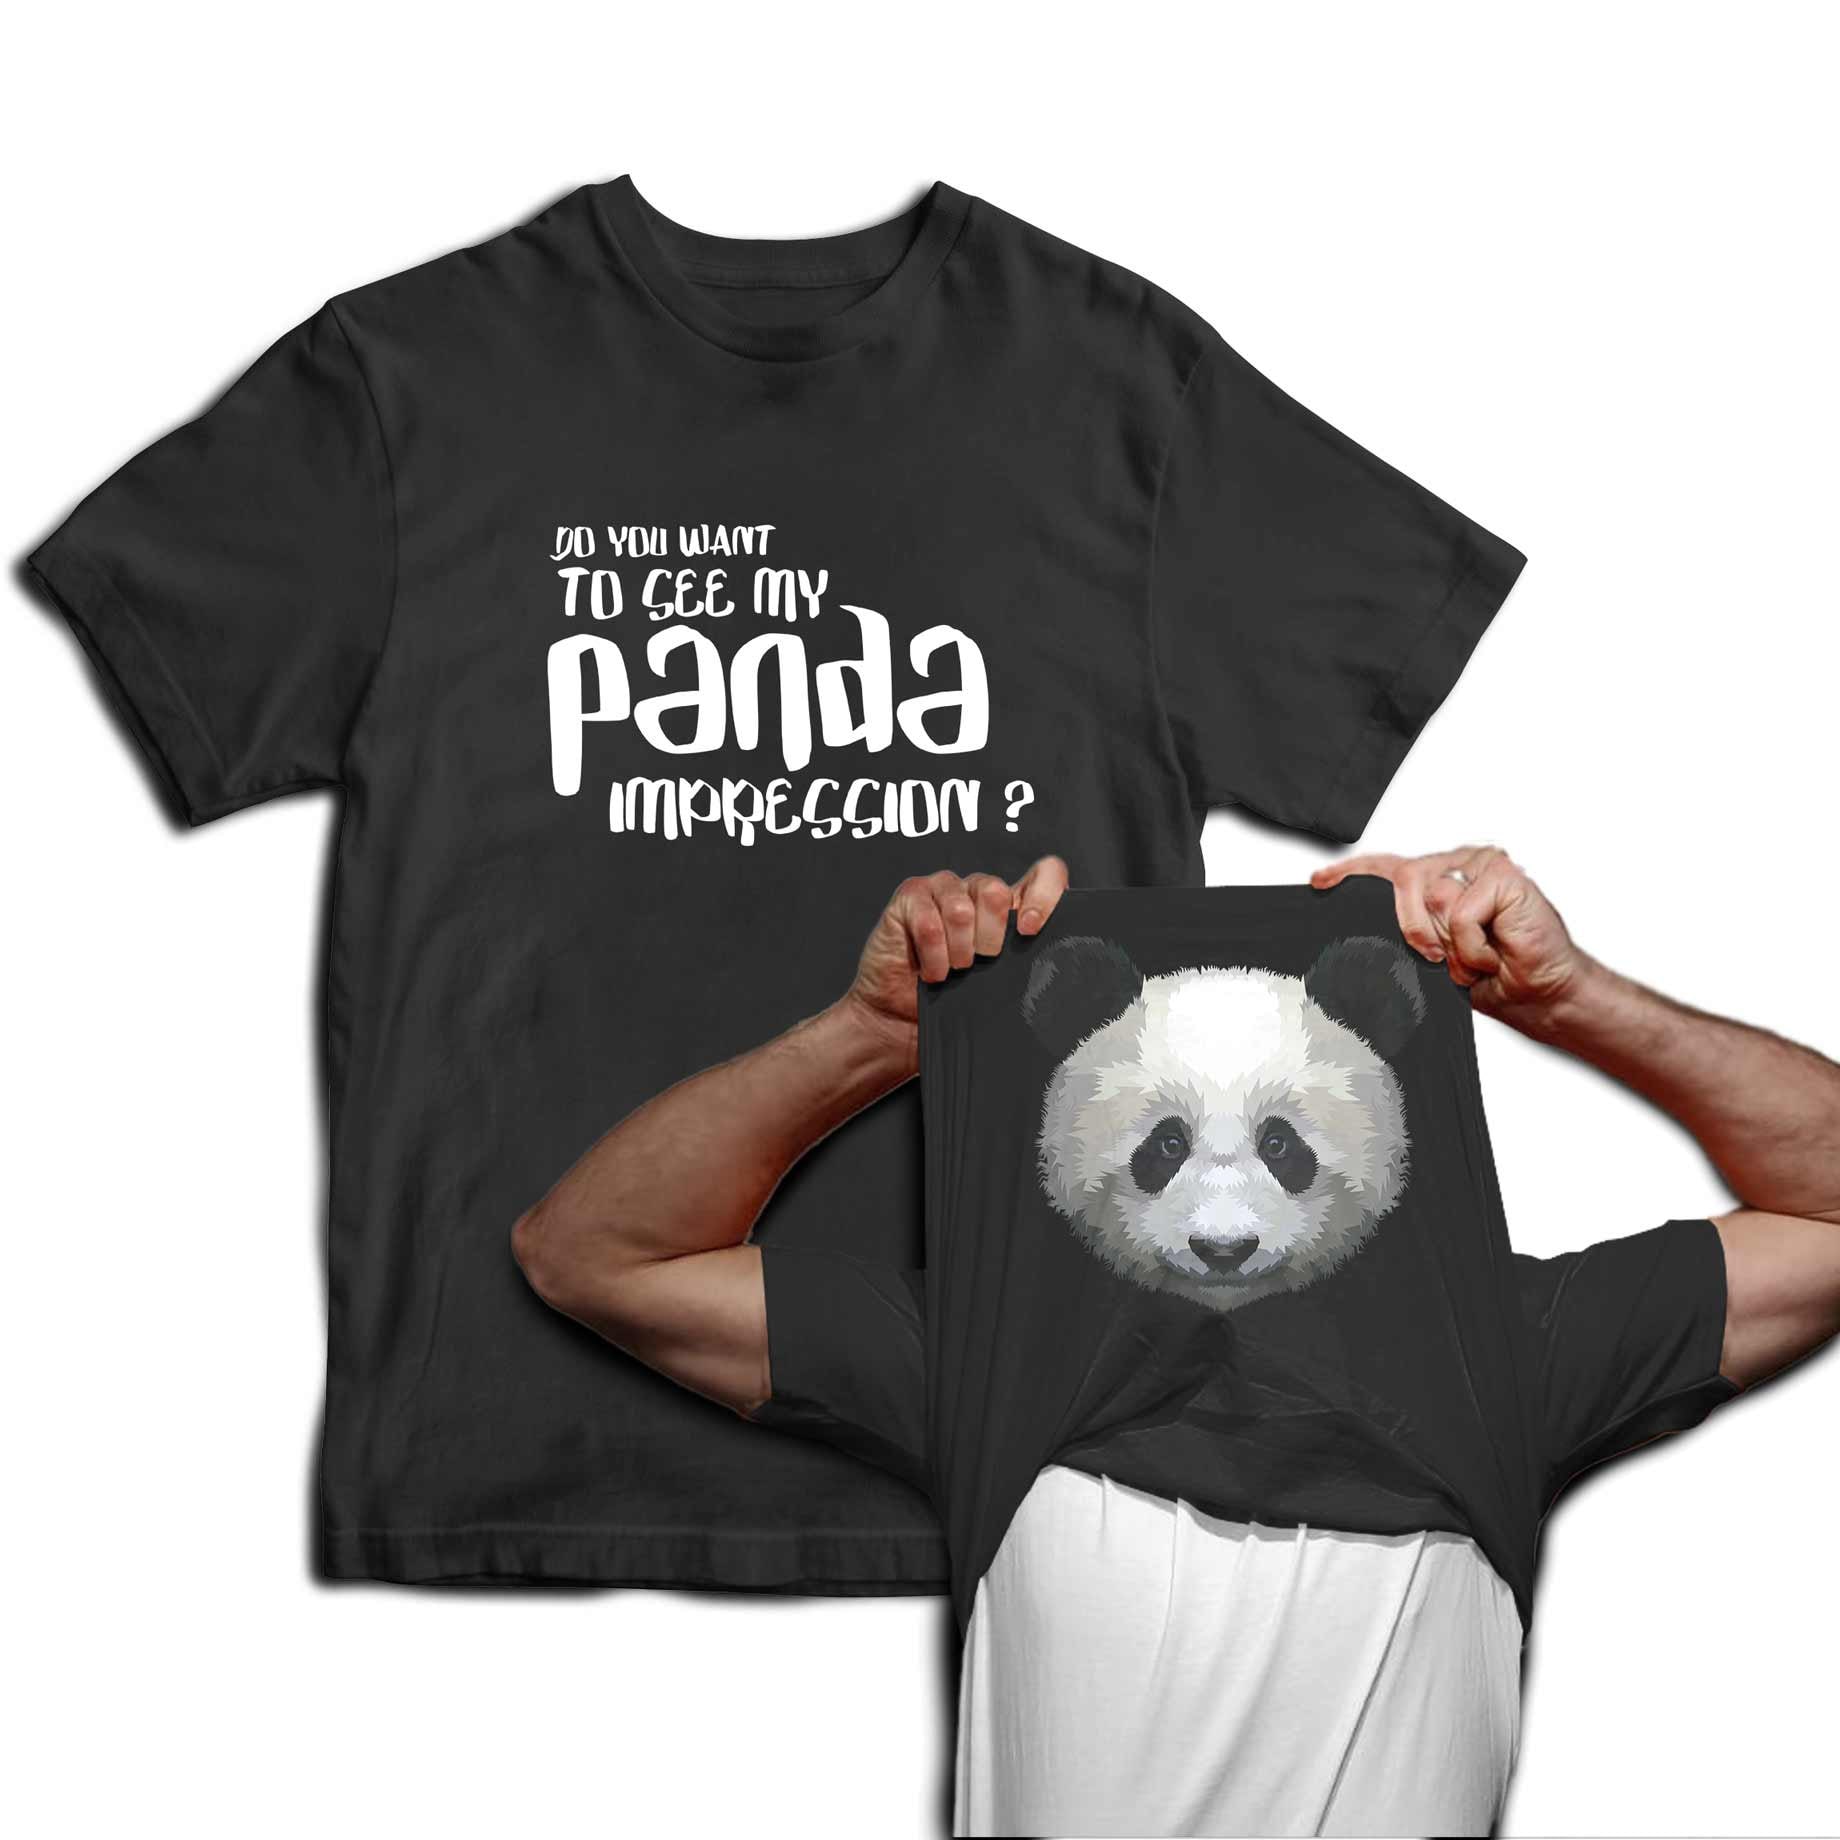 Mandy's Moon Personalized Gifts Love Panda T Shirt Adult S